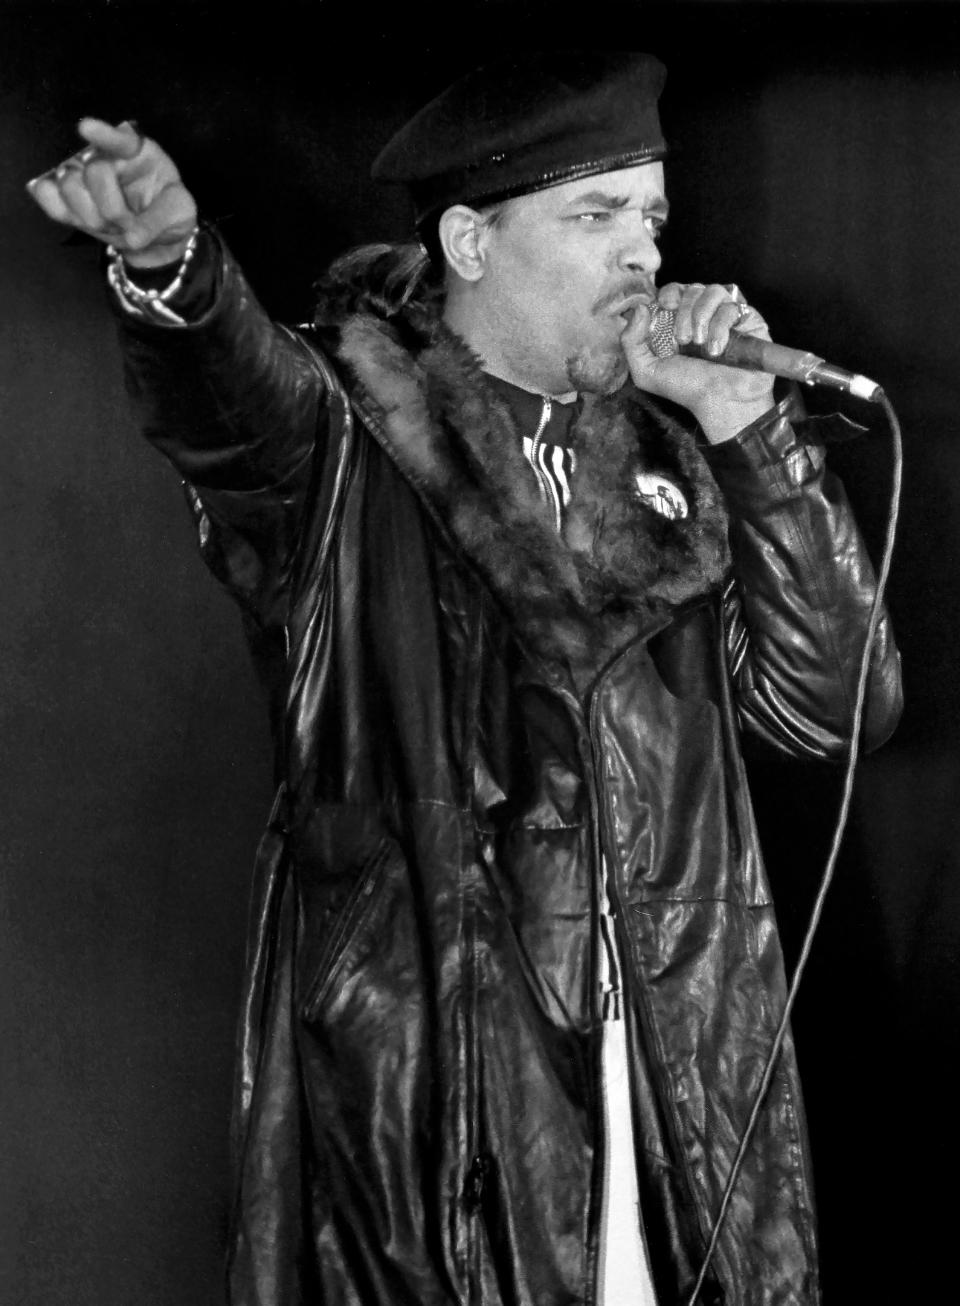 Ice-T holds a microphone while rapping at a concert. (Raymond Boyd / Getty Images)